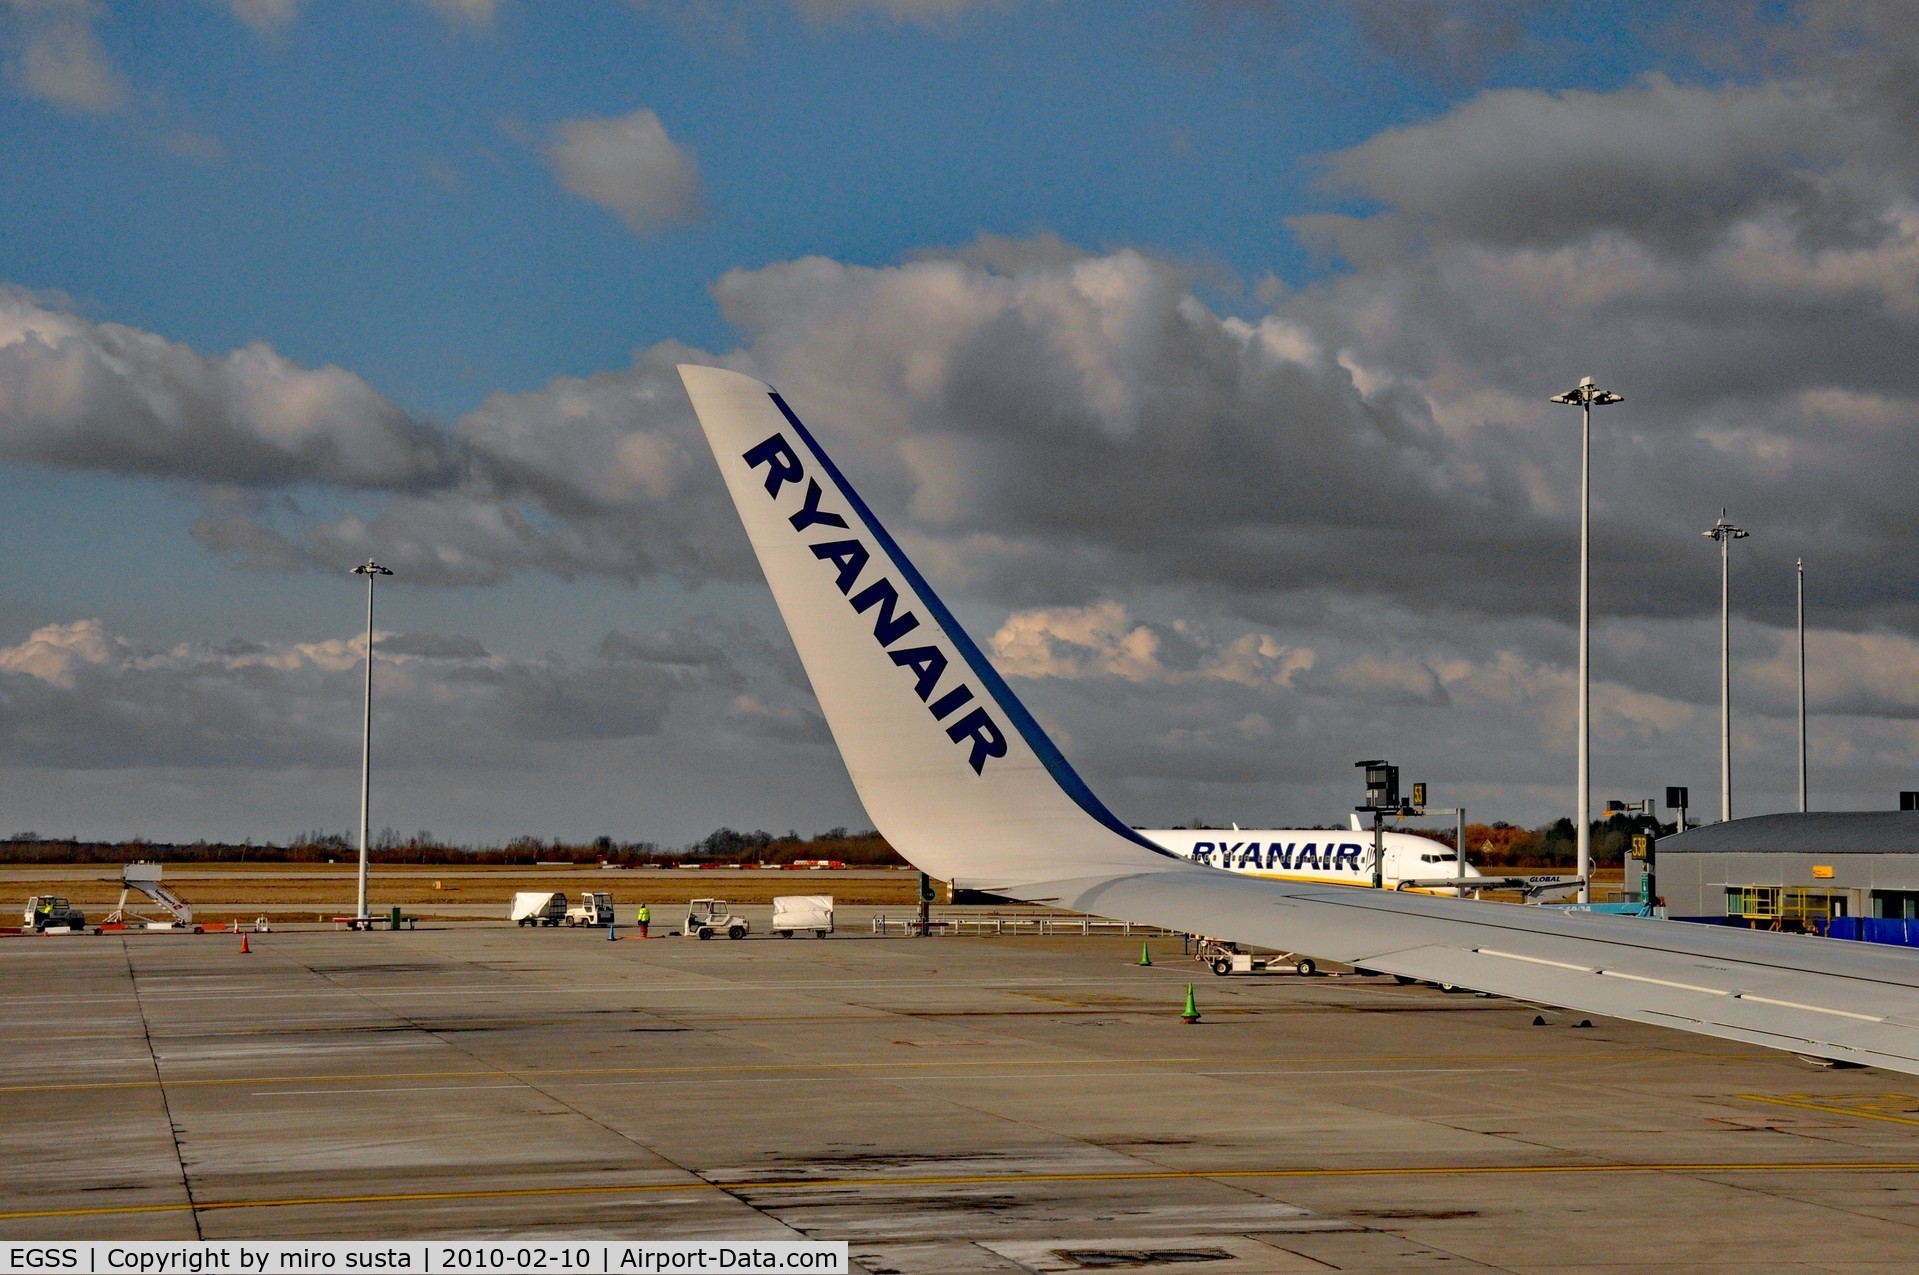 London Stansted Airport, London, England United Kingdom (EGSS) - Ryanair